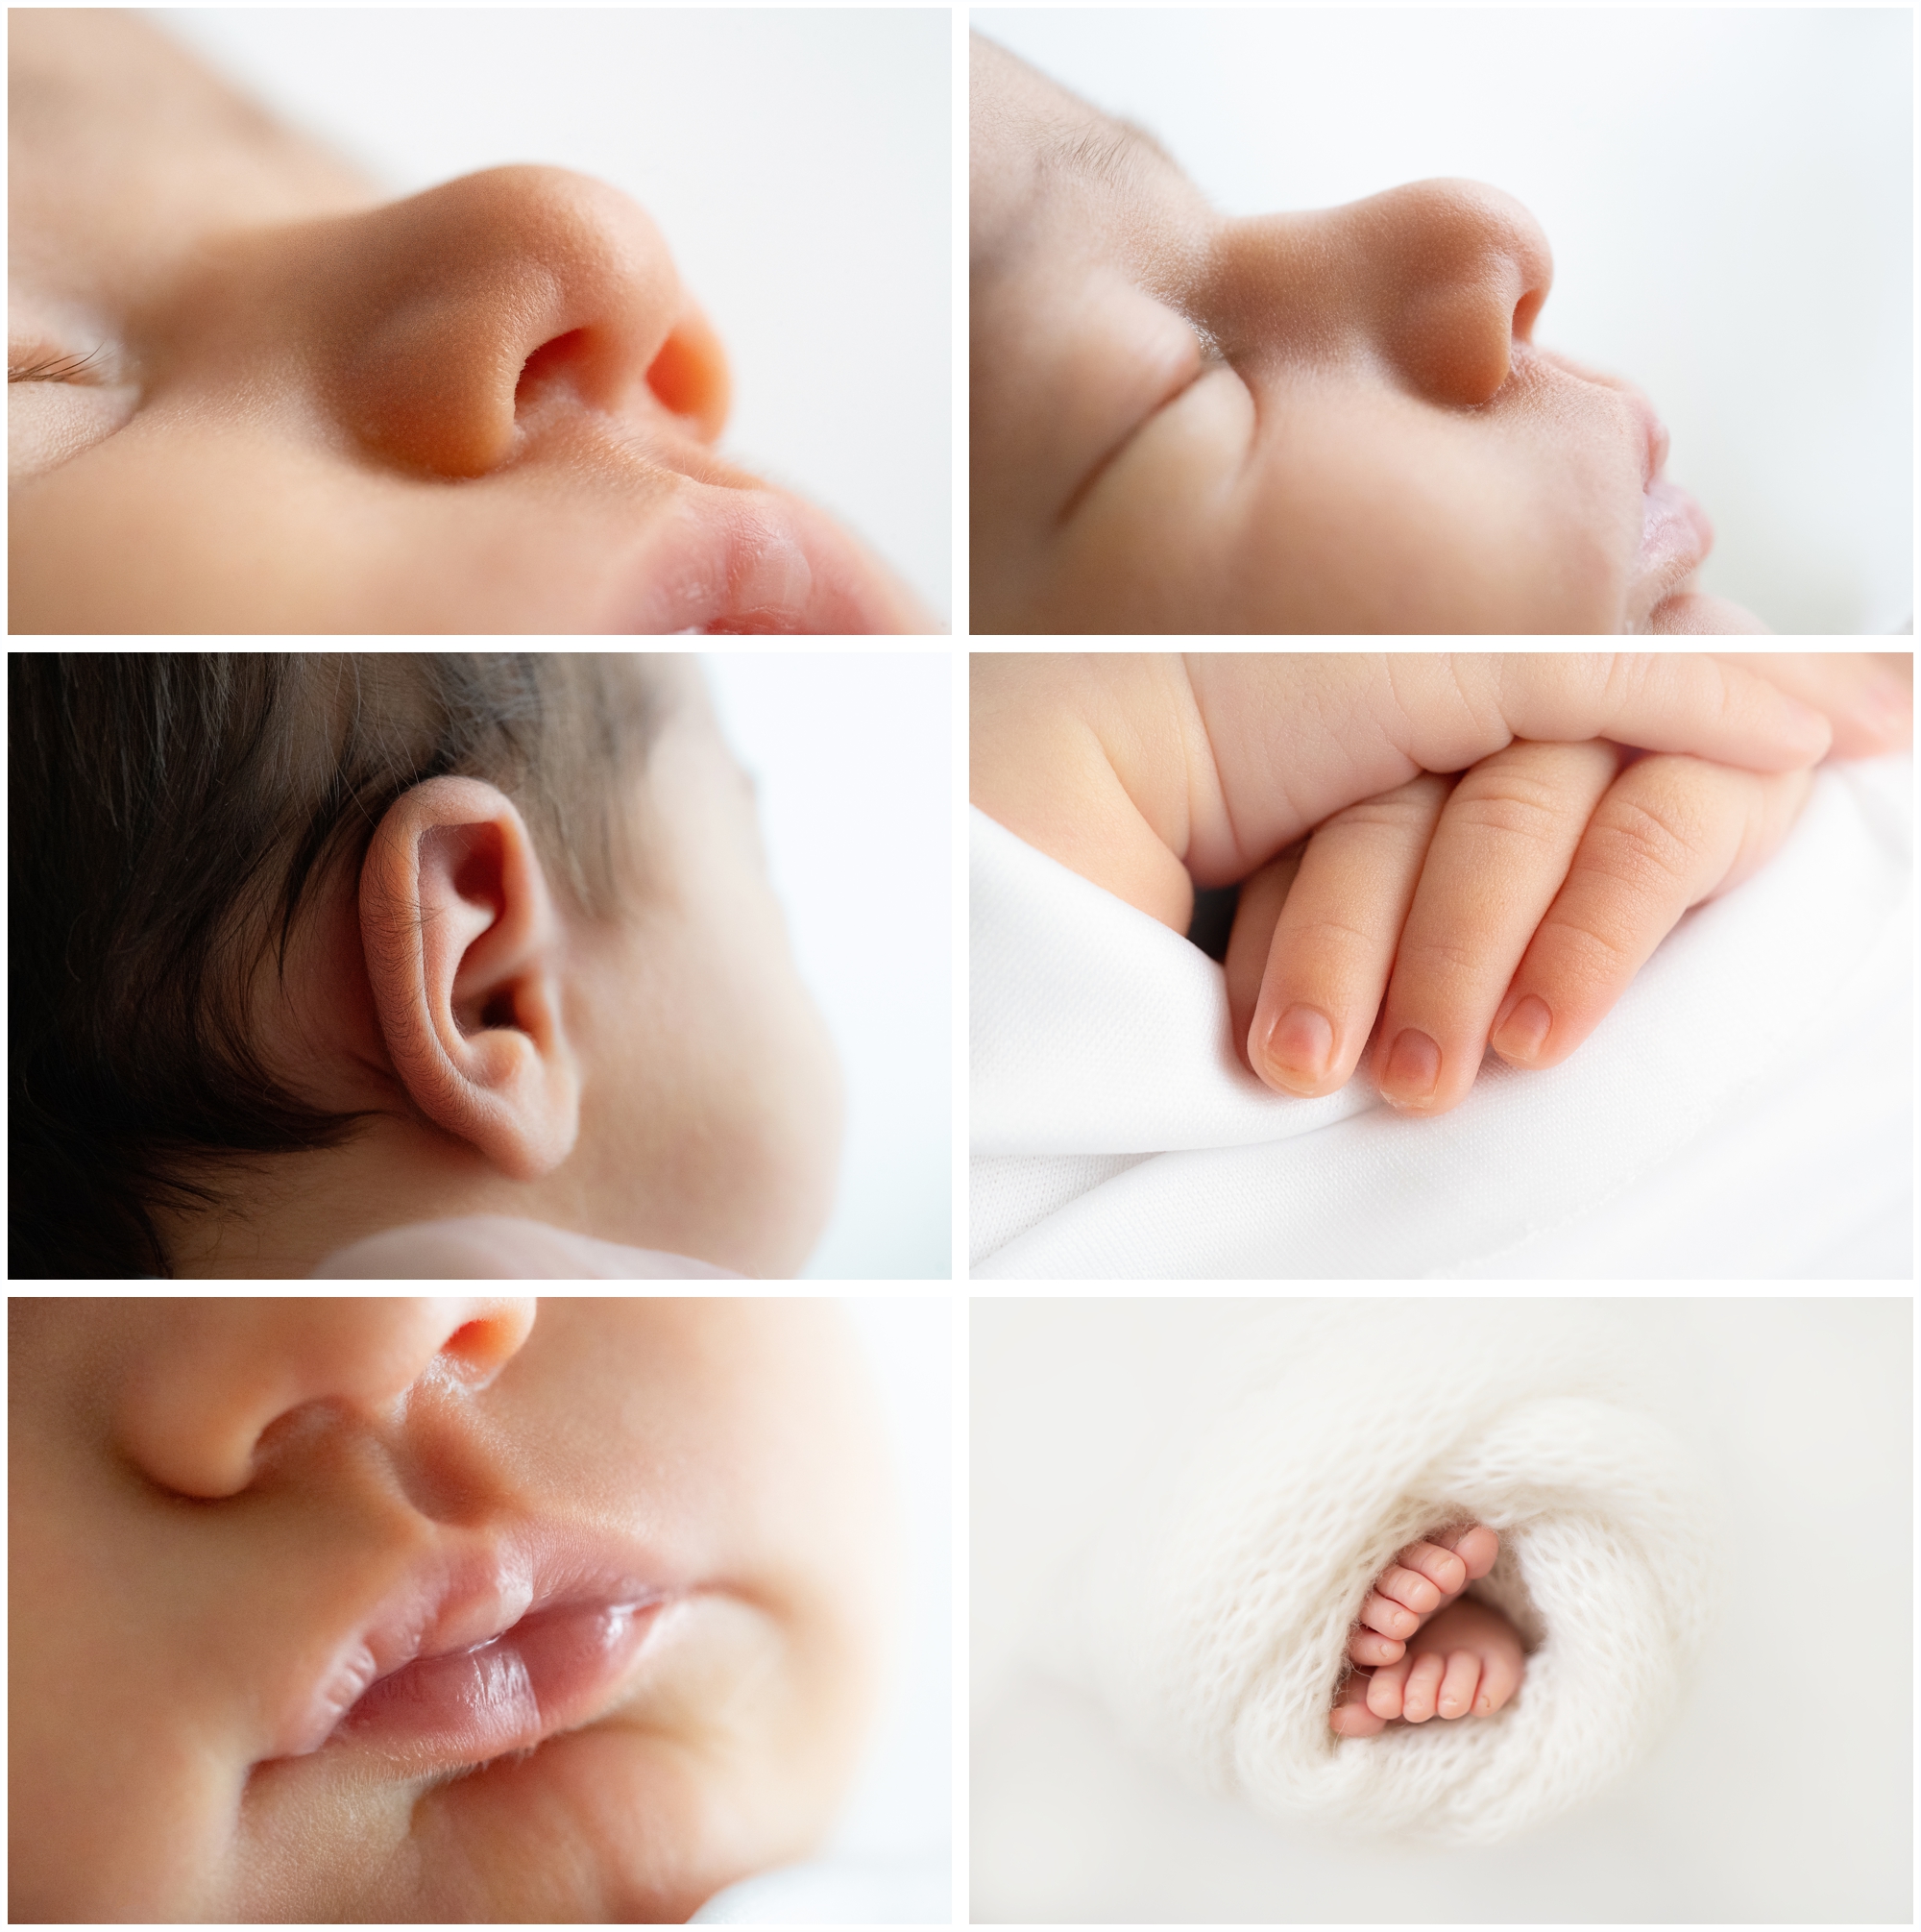 Newborn photoshoots of baby's close-up details shotes being photographed in Jupiter Fl studio